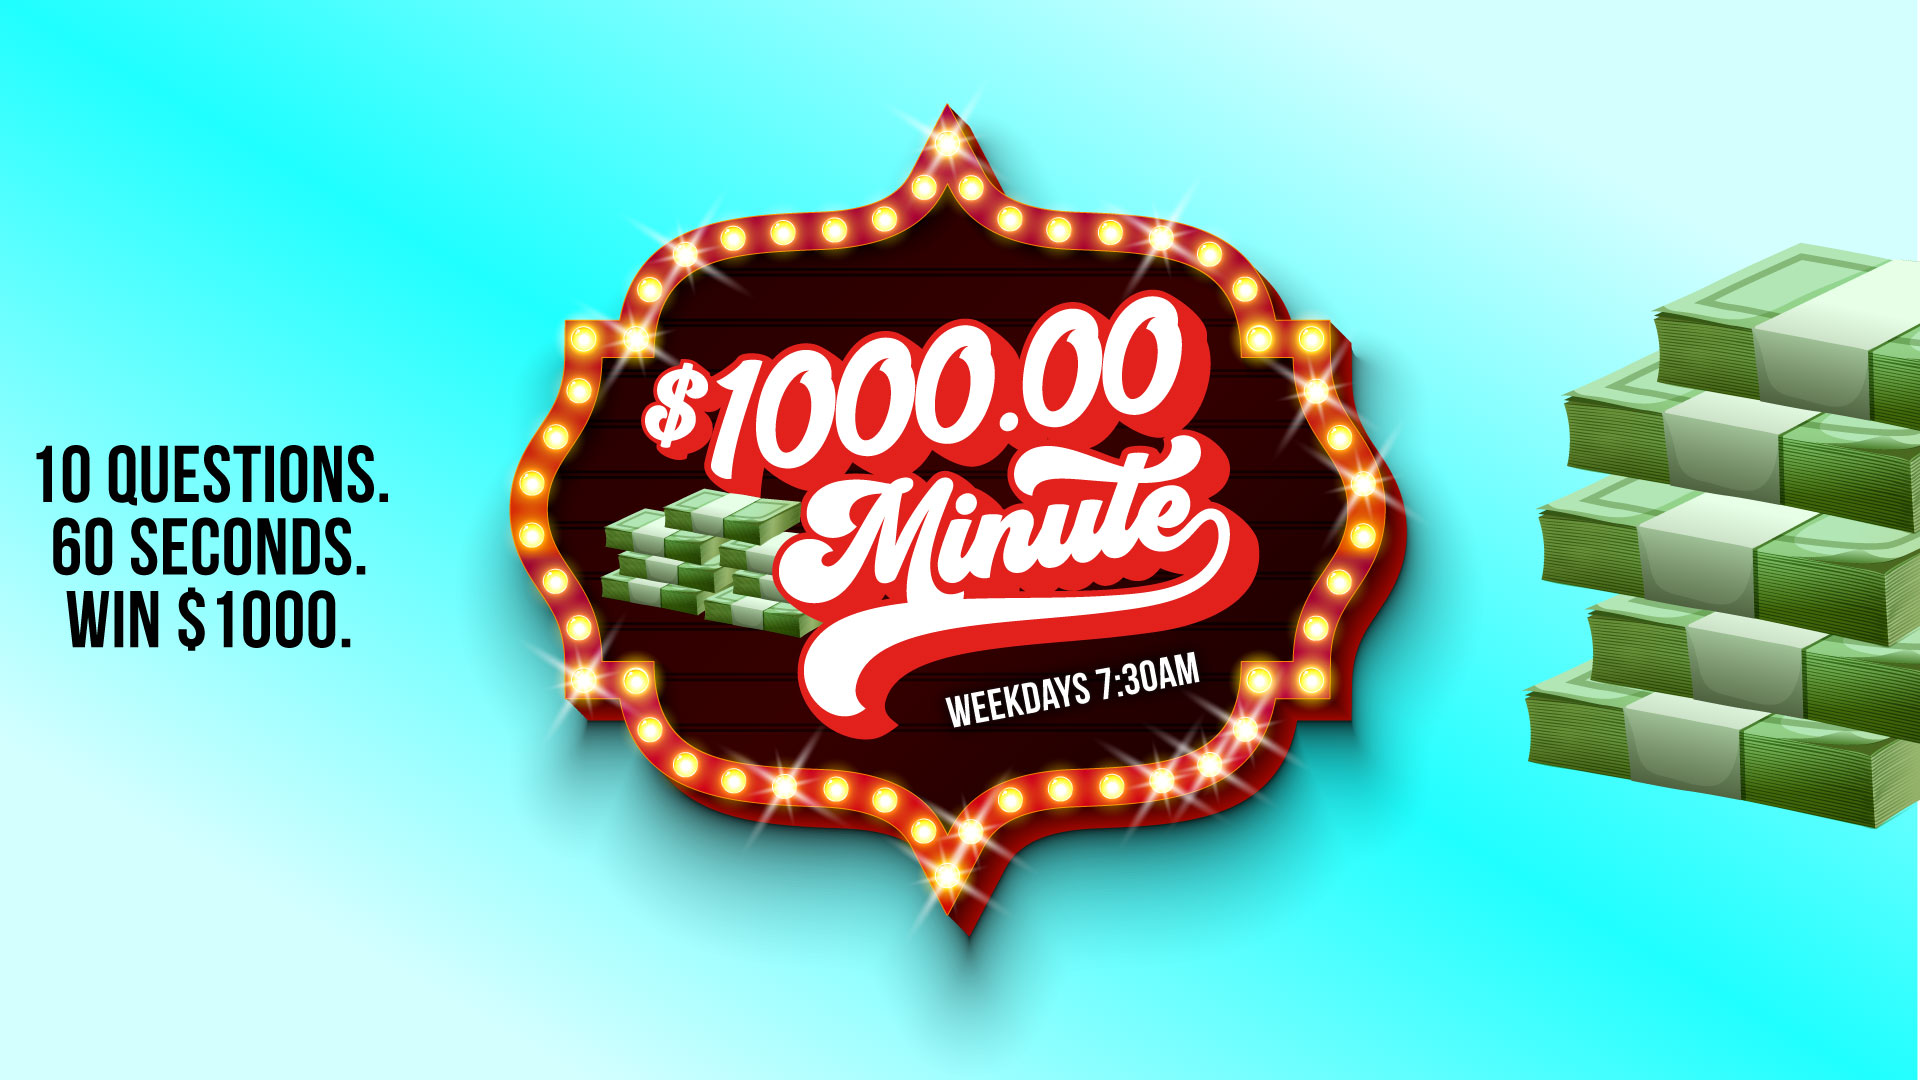 The $1,000 Minute – The Most Exciting 60 Seconds On the Radio!